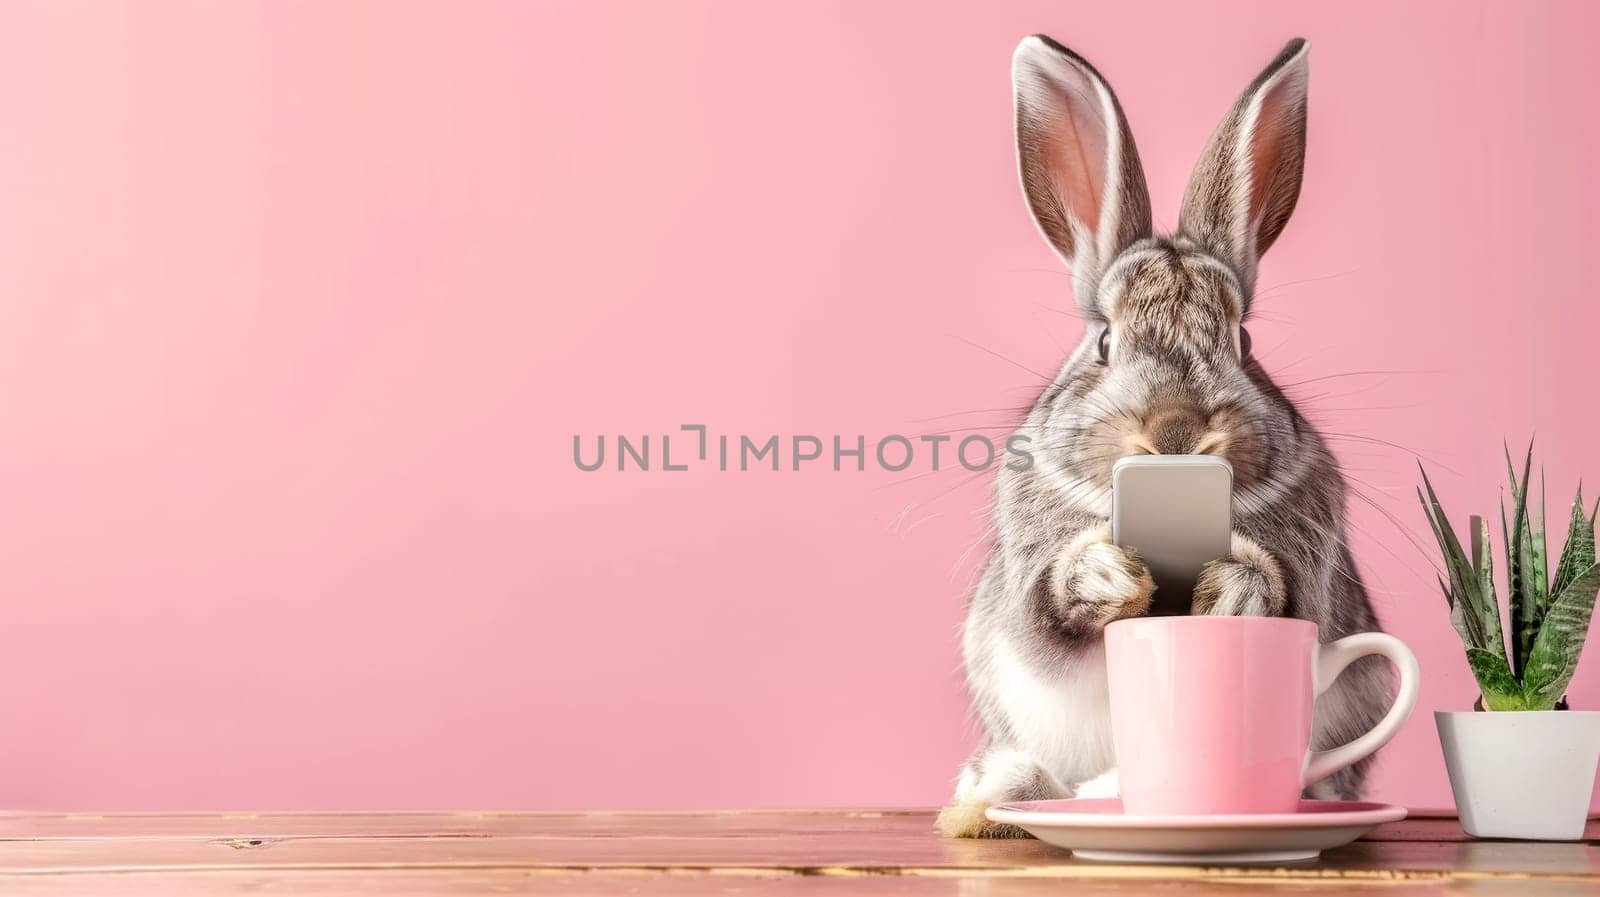 Cute rabbit holding a smartphone beside a pink coffee cup on a wooden table with pink backdrop